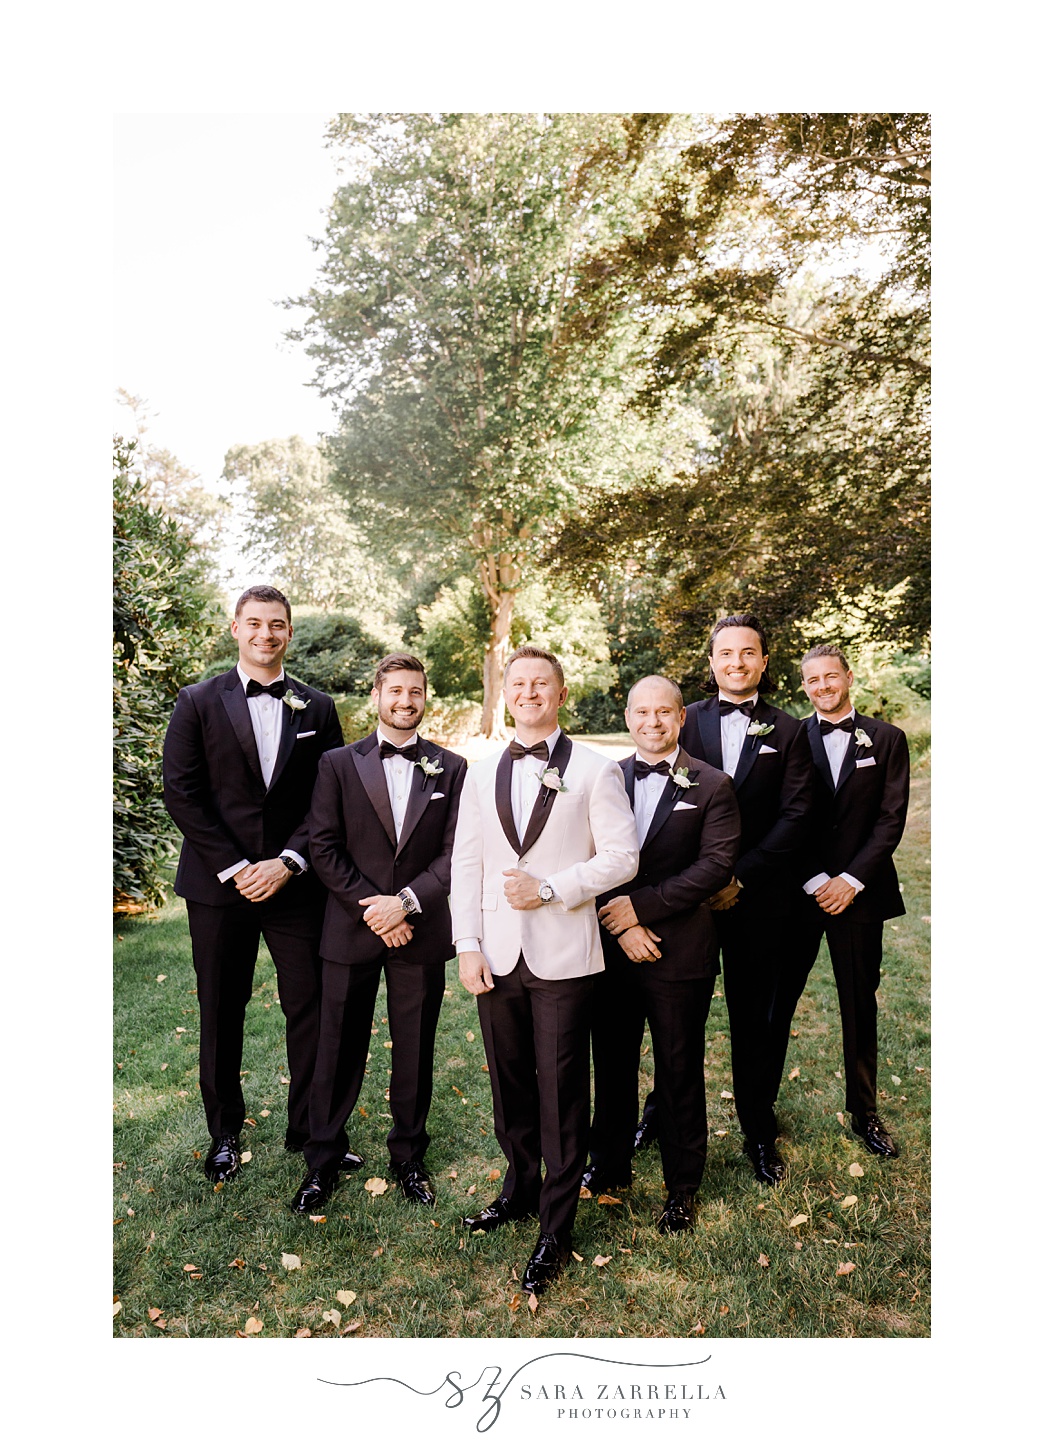 groom in classic white tux jacket poses with groomsmen in black suits 